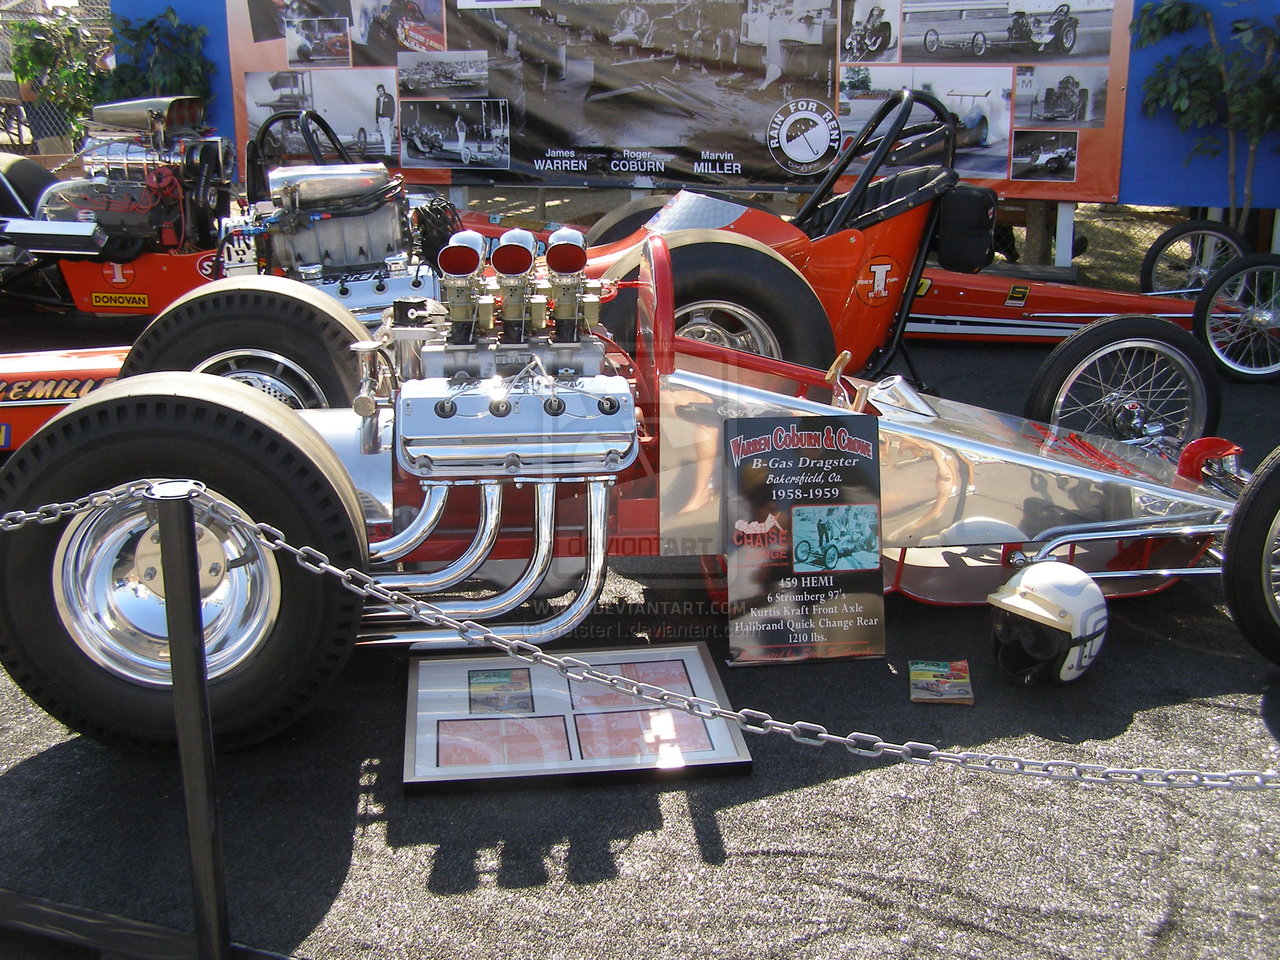 REAR ENGINE DRAGSTER'S ONLY